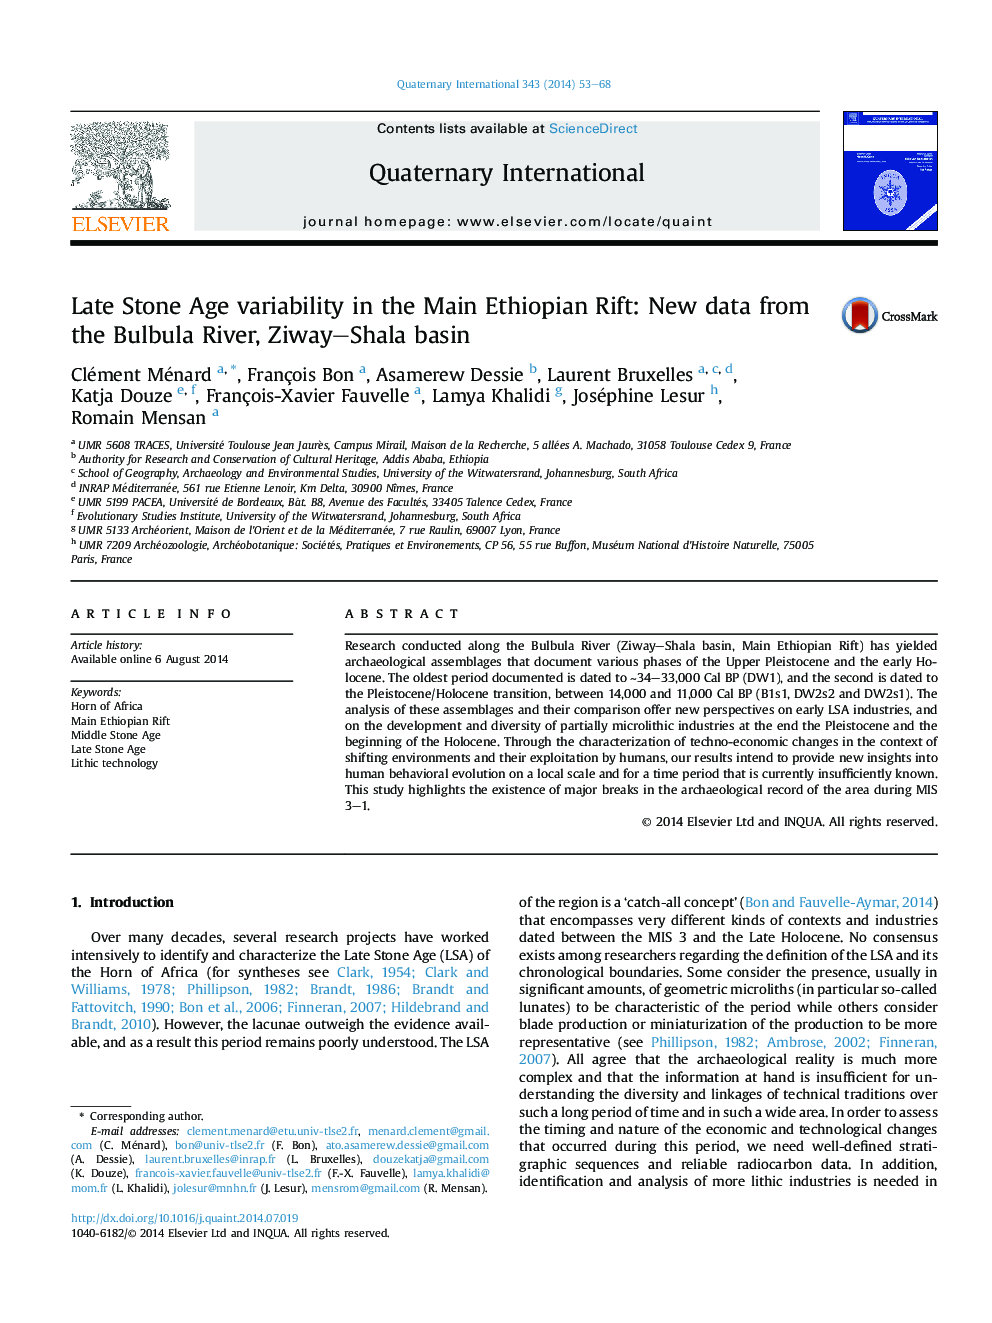 Late Stone Age variability in the Main Ethiopian Rift: New data from the Bulbula River, Ziway–Shala basin